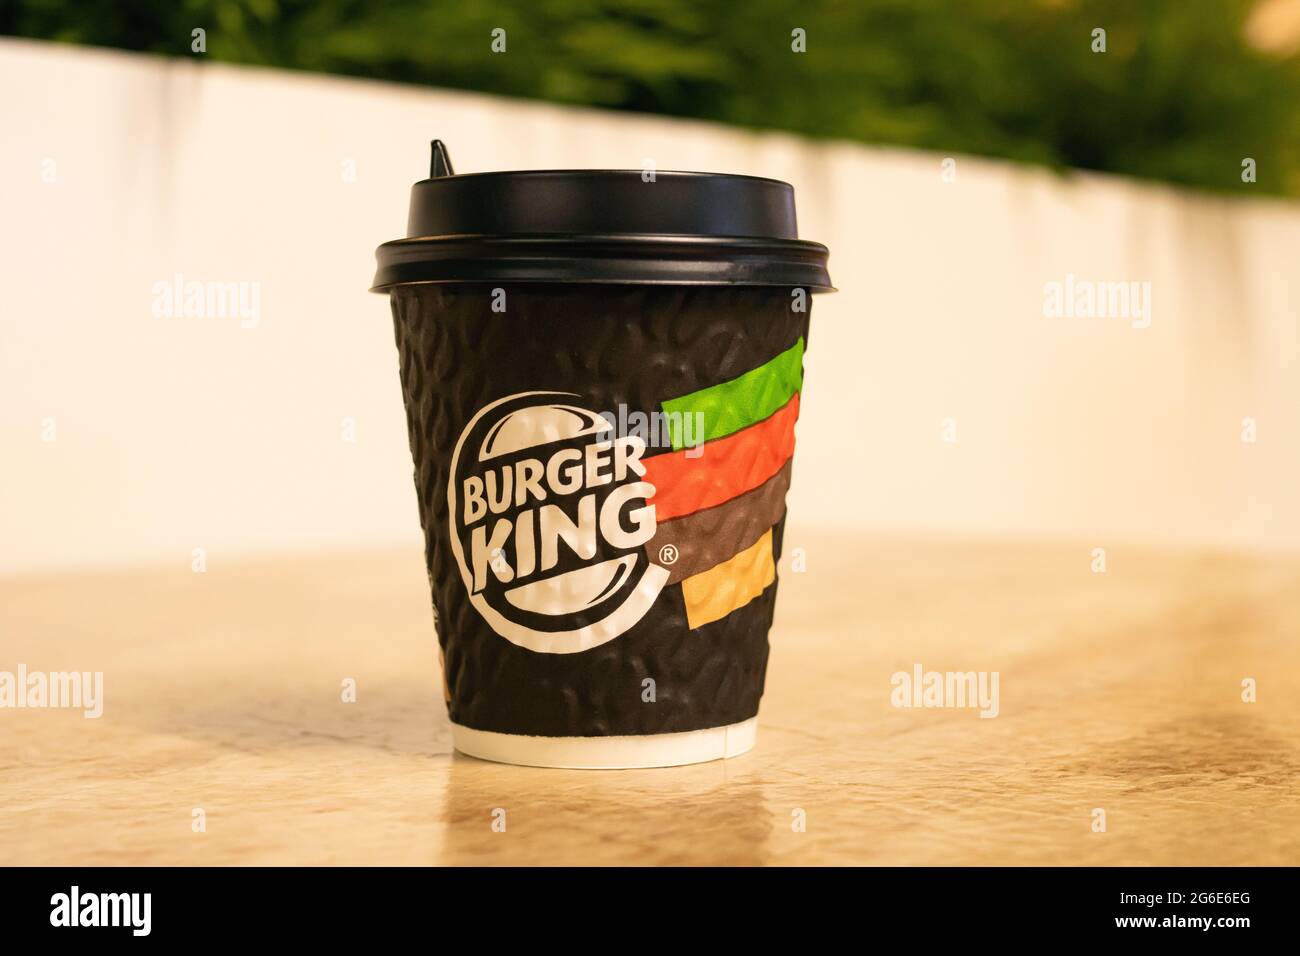 BELARUS, NOVOPOLOTSK - 02 JULE, 2021: Paper cup of coffee with Burger King logo on table Stock Photo